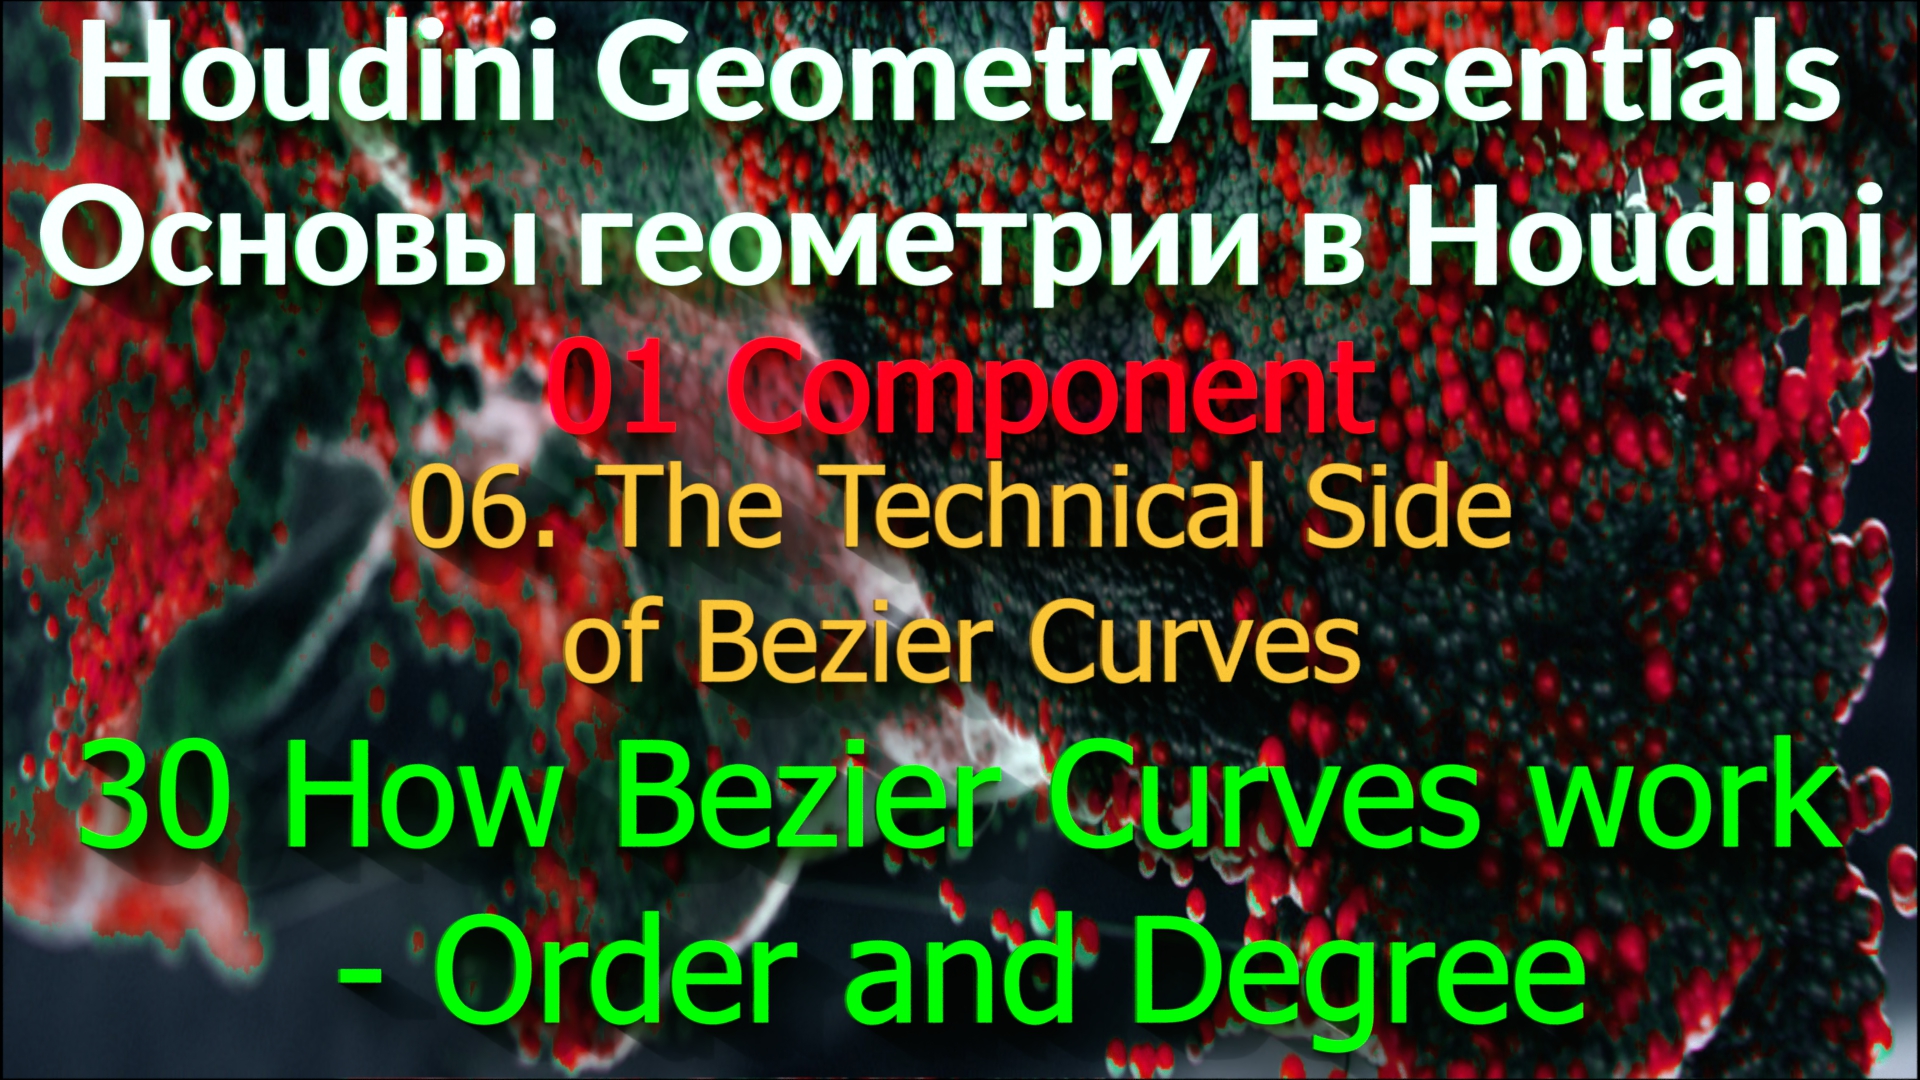 01_06_30. How Bezier Curves work - Order and Degree